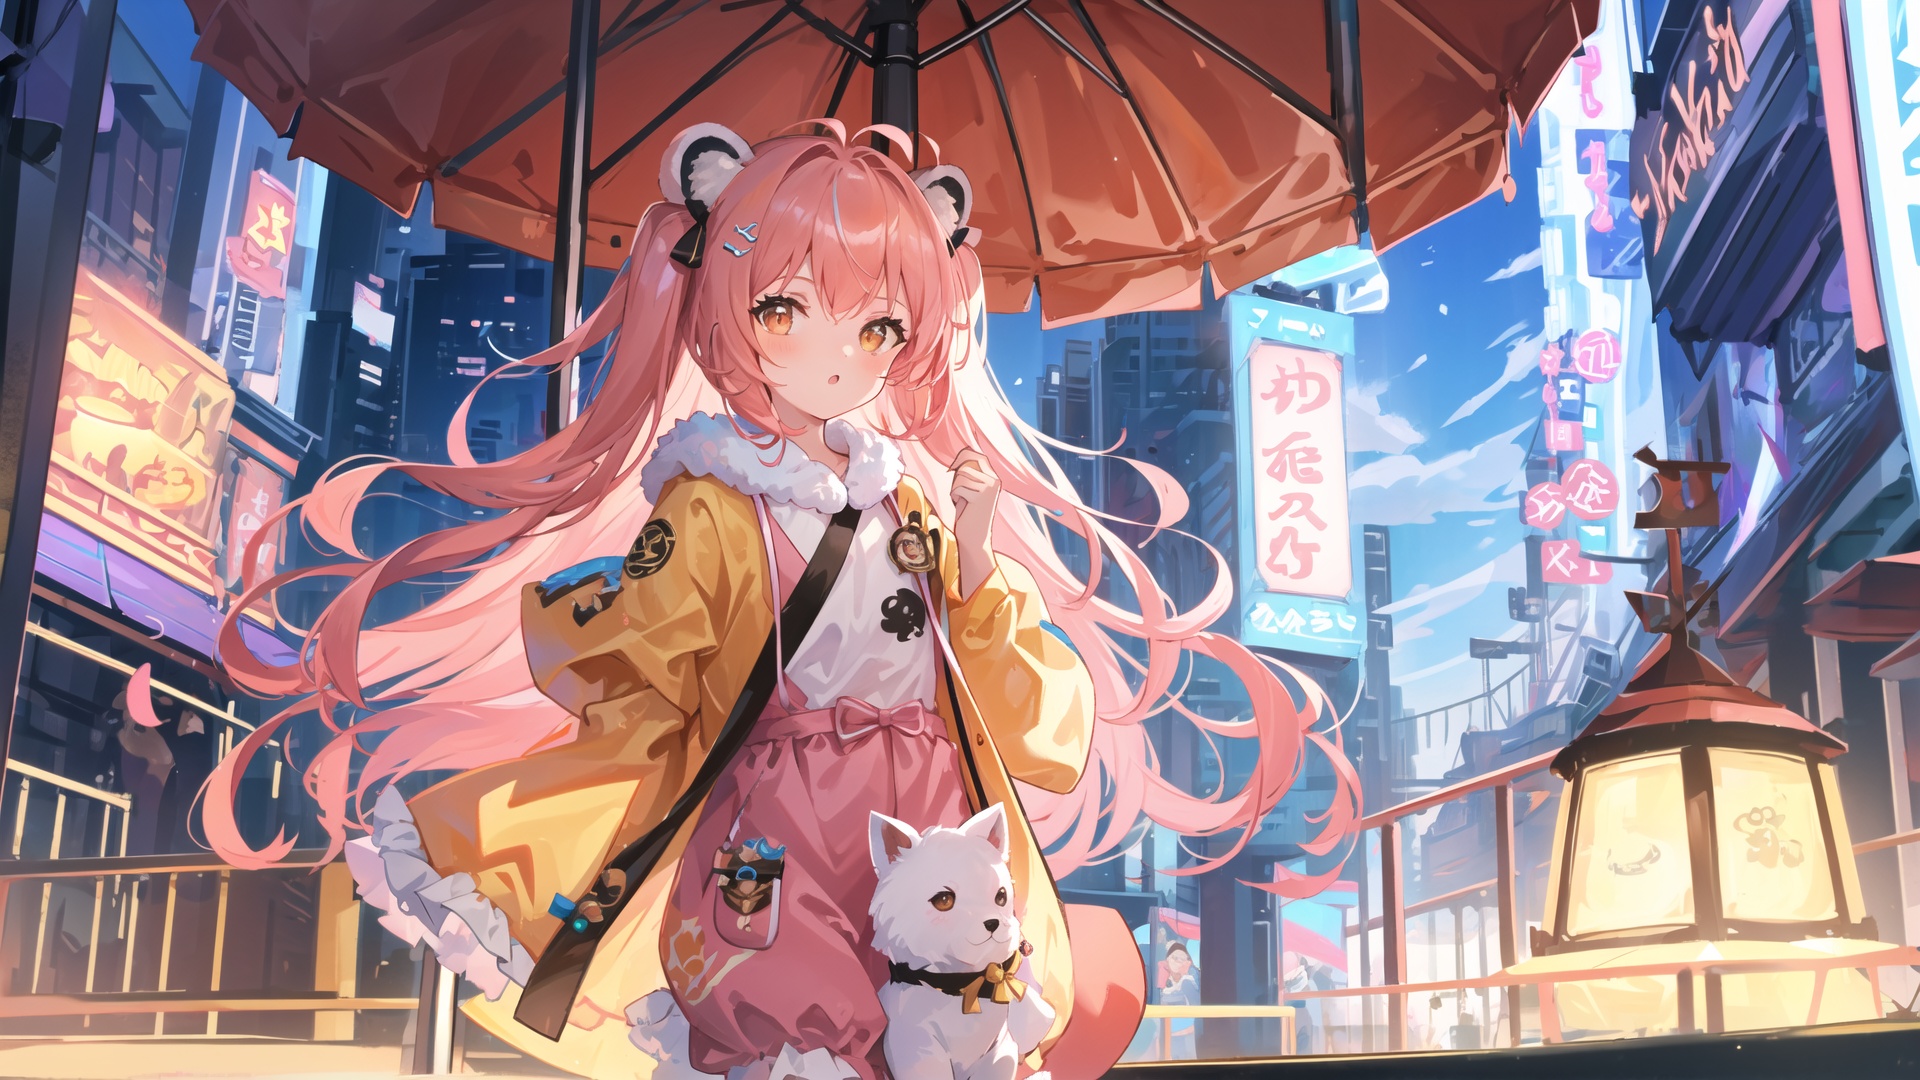  mousepad \(medium\),deep light and shadow, - theme, first-person view,
amusement park carousel ferris_wheel,a girl wearing a fluffy animal kigurumi pajamas ,
orange eyes,pink hair,
Summoner costume,
in summer,looking to the side,
masterpiece, best quality, ultra detailed,